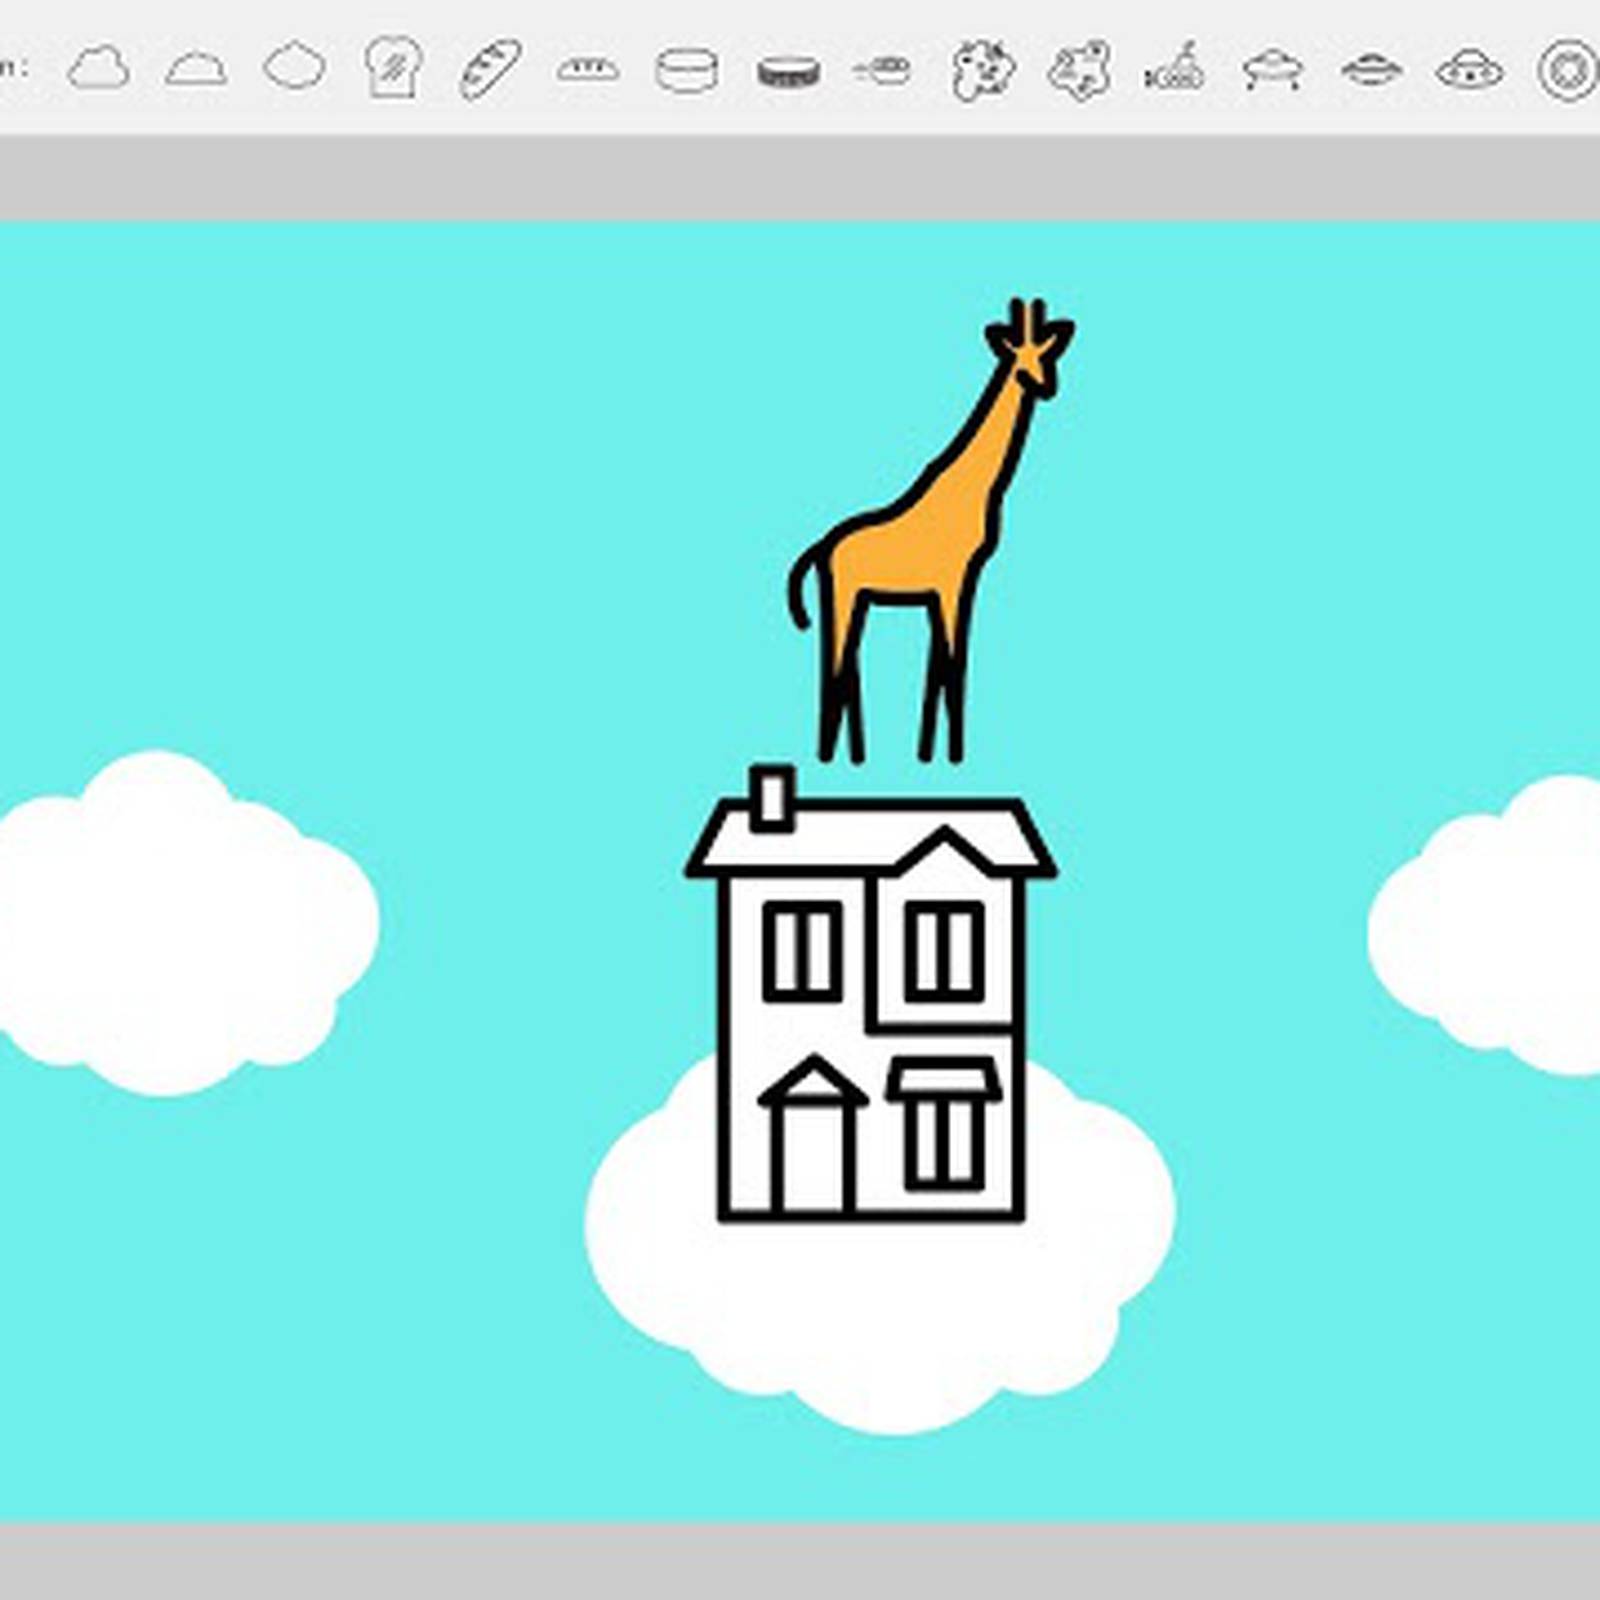 Google launches AutoDraw For Those Who Love Doodling And Want To